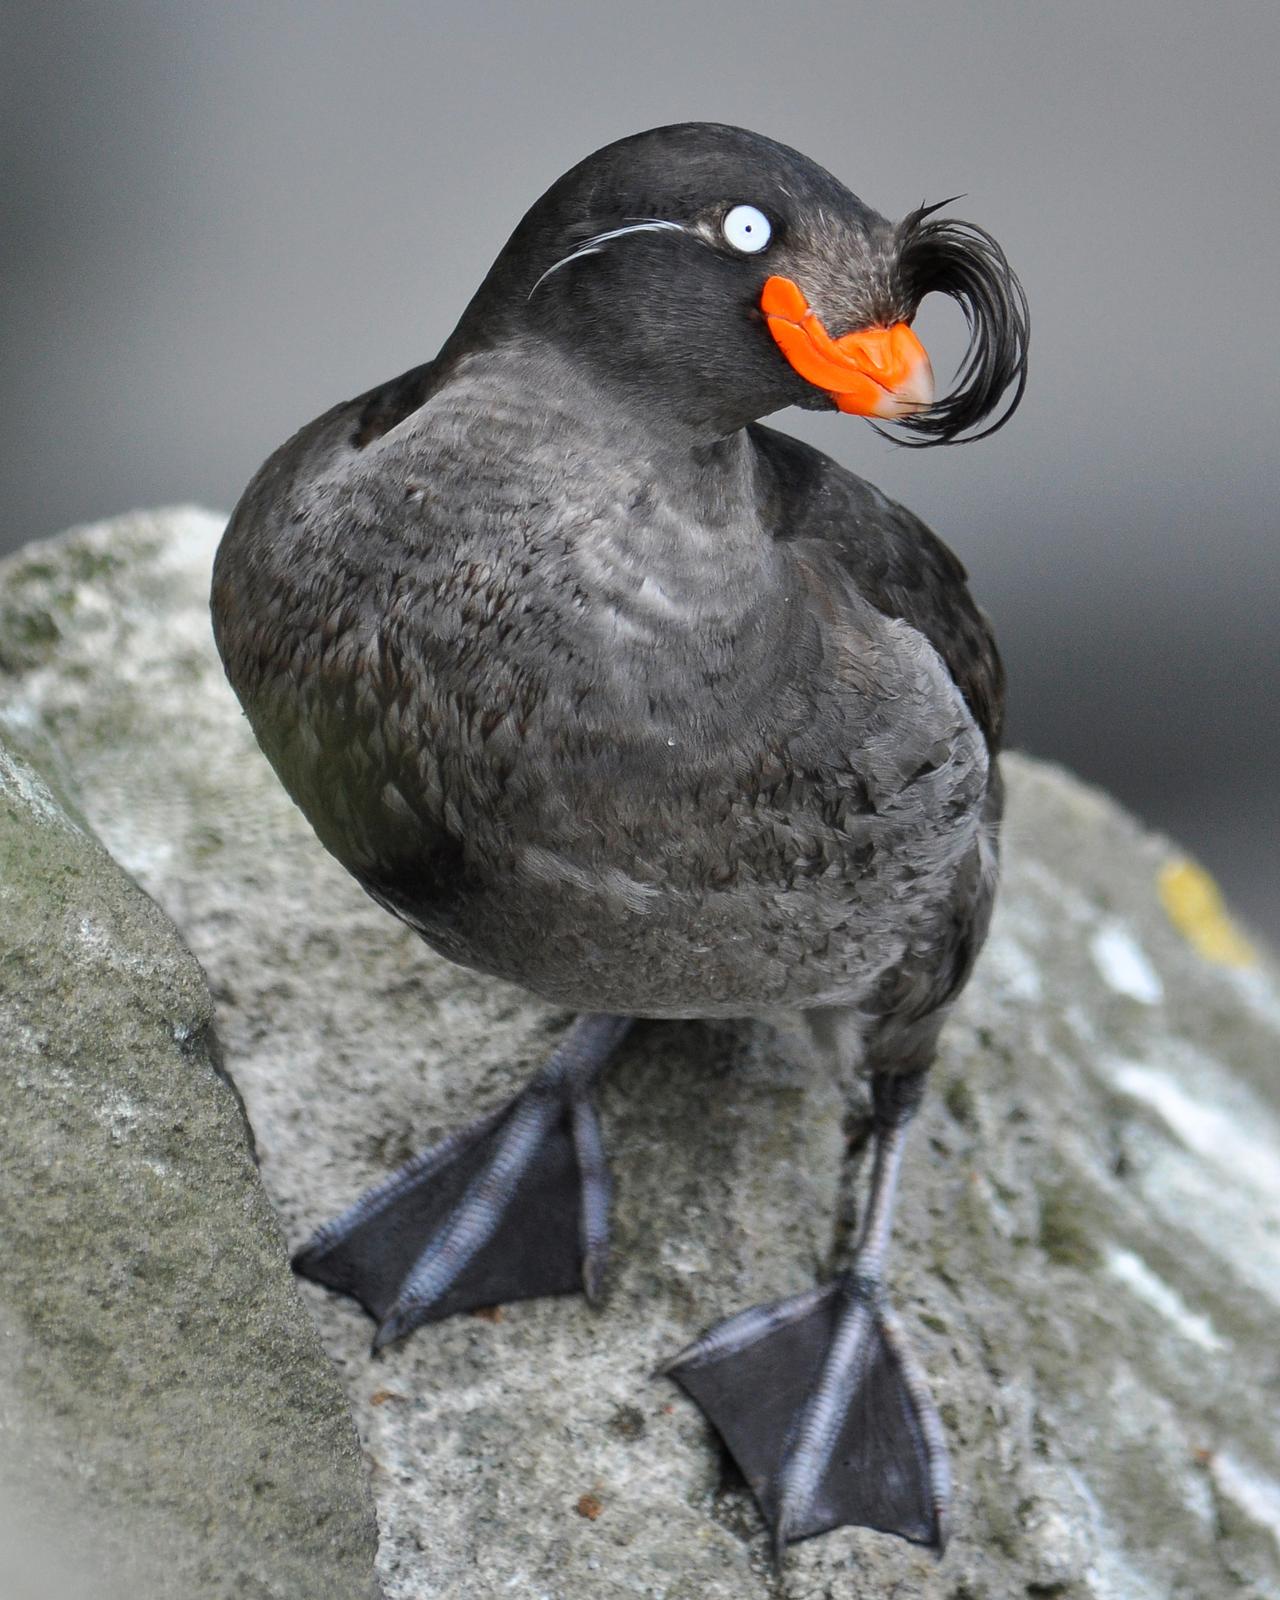 Crested Auklet Photo by Ryan P. O'Donnell